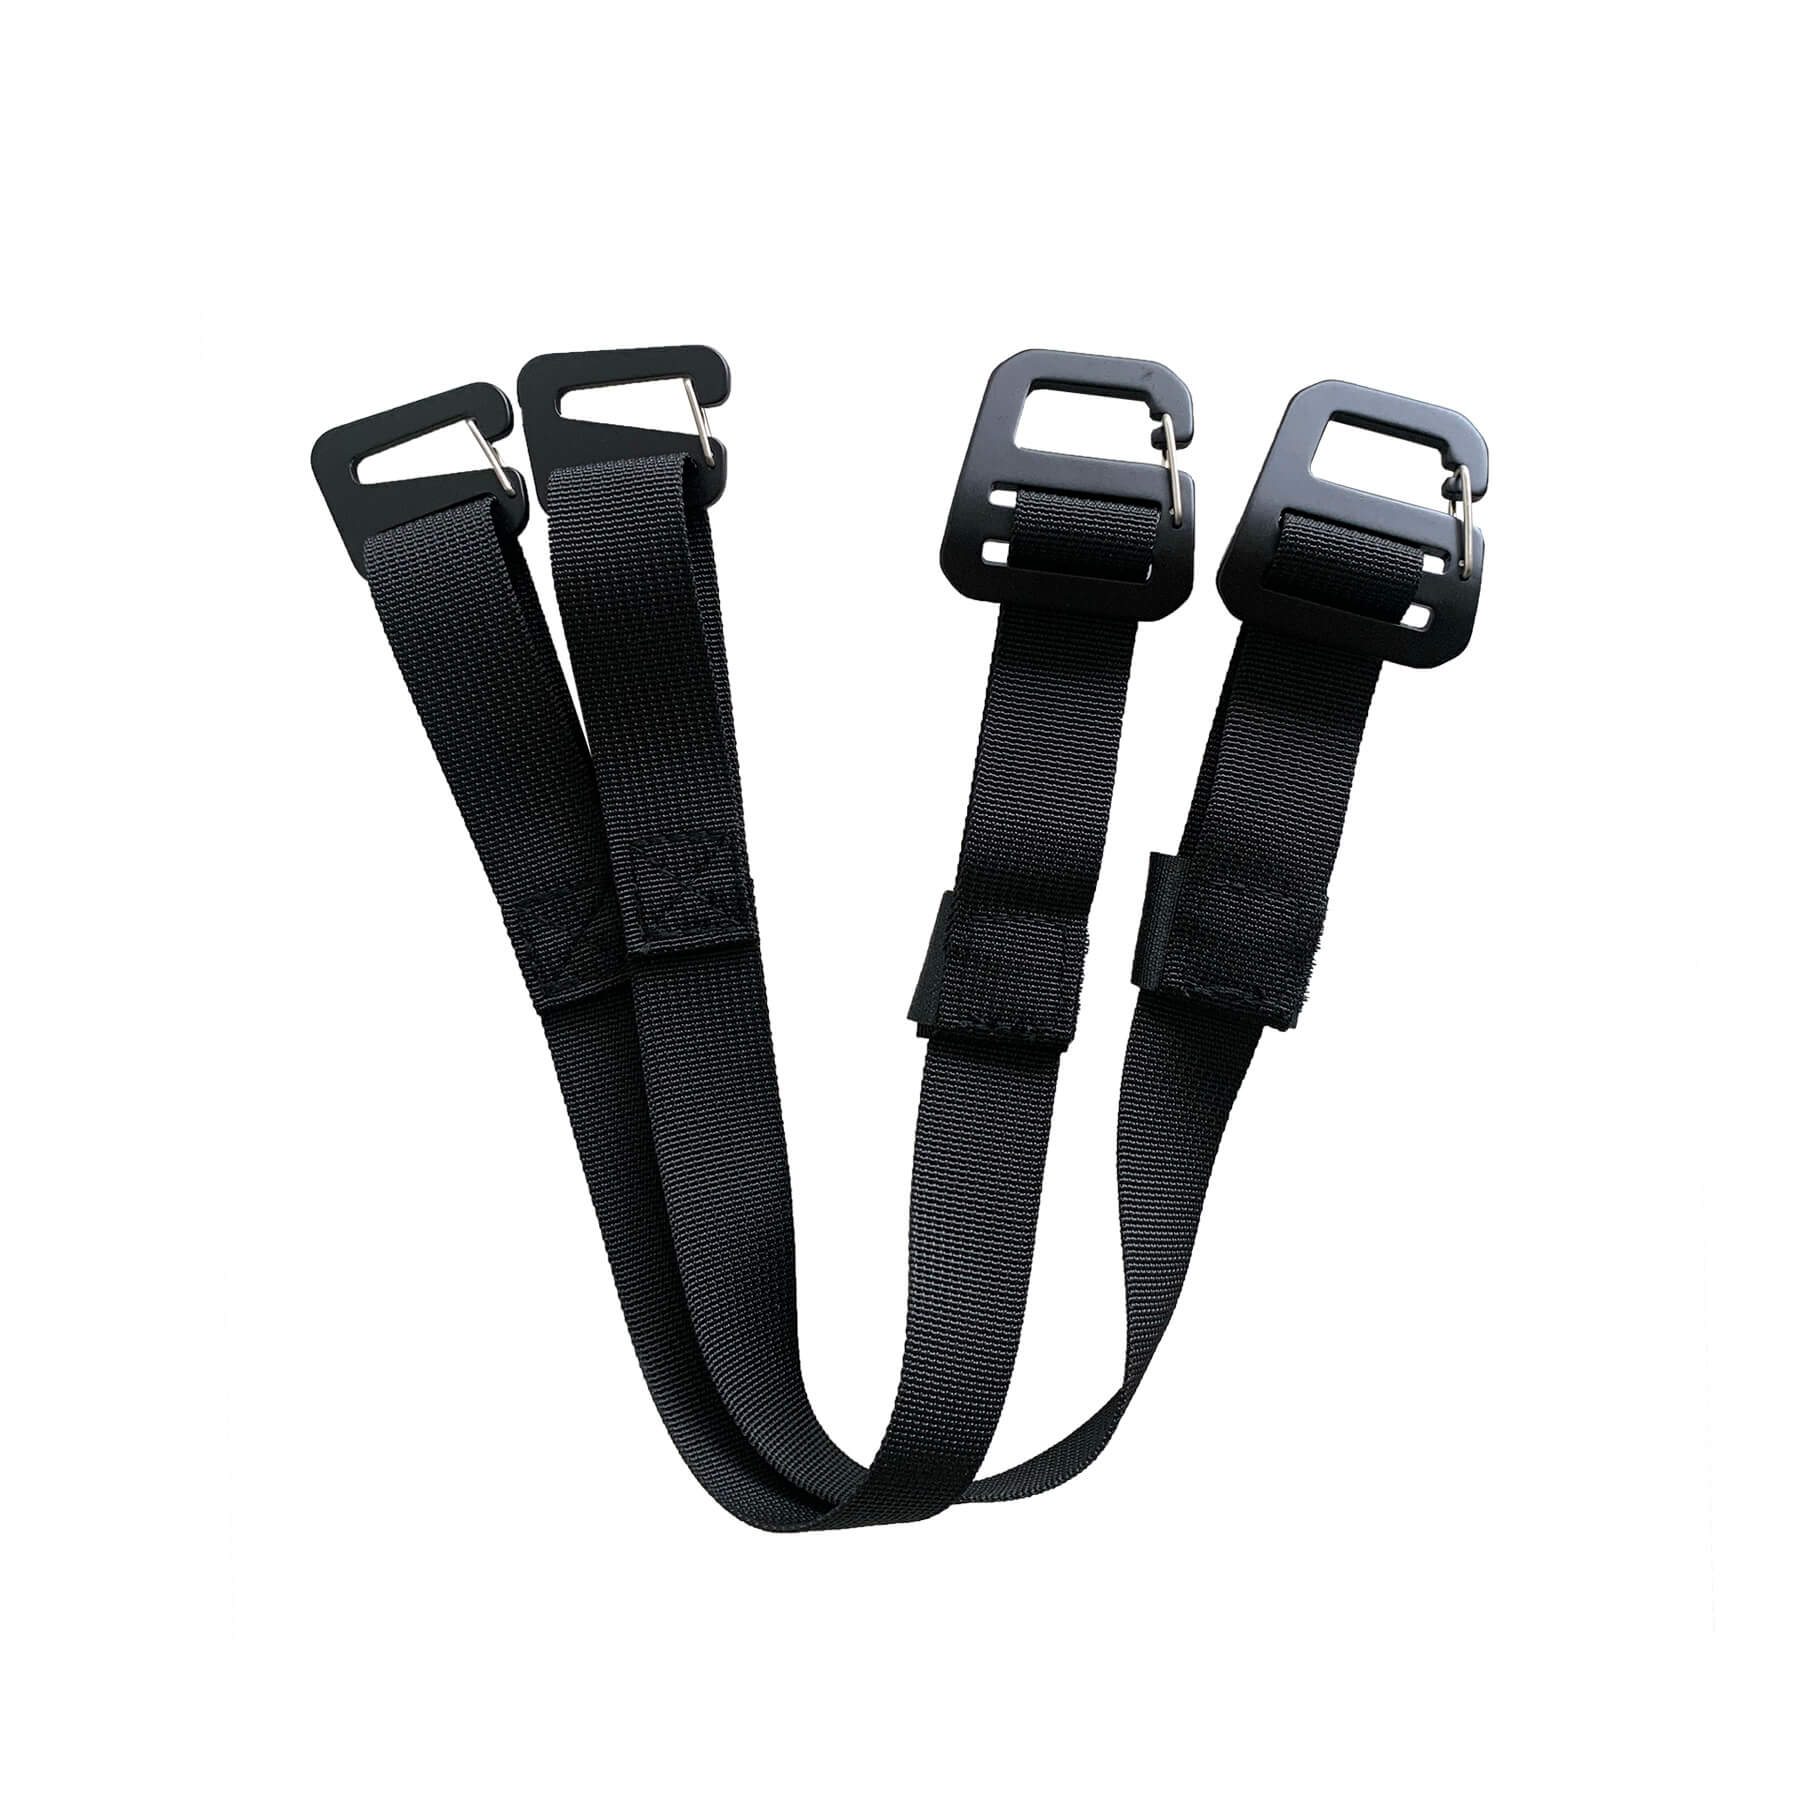 Standard Buckle Straps, Motorcycle Accessories